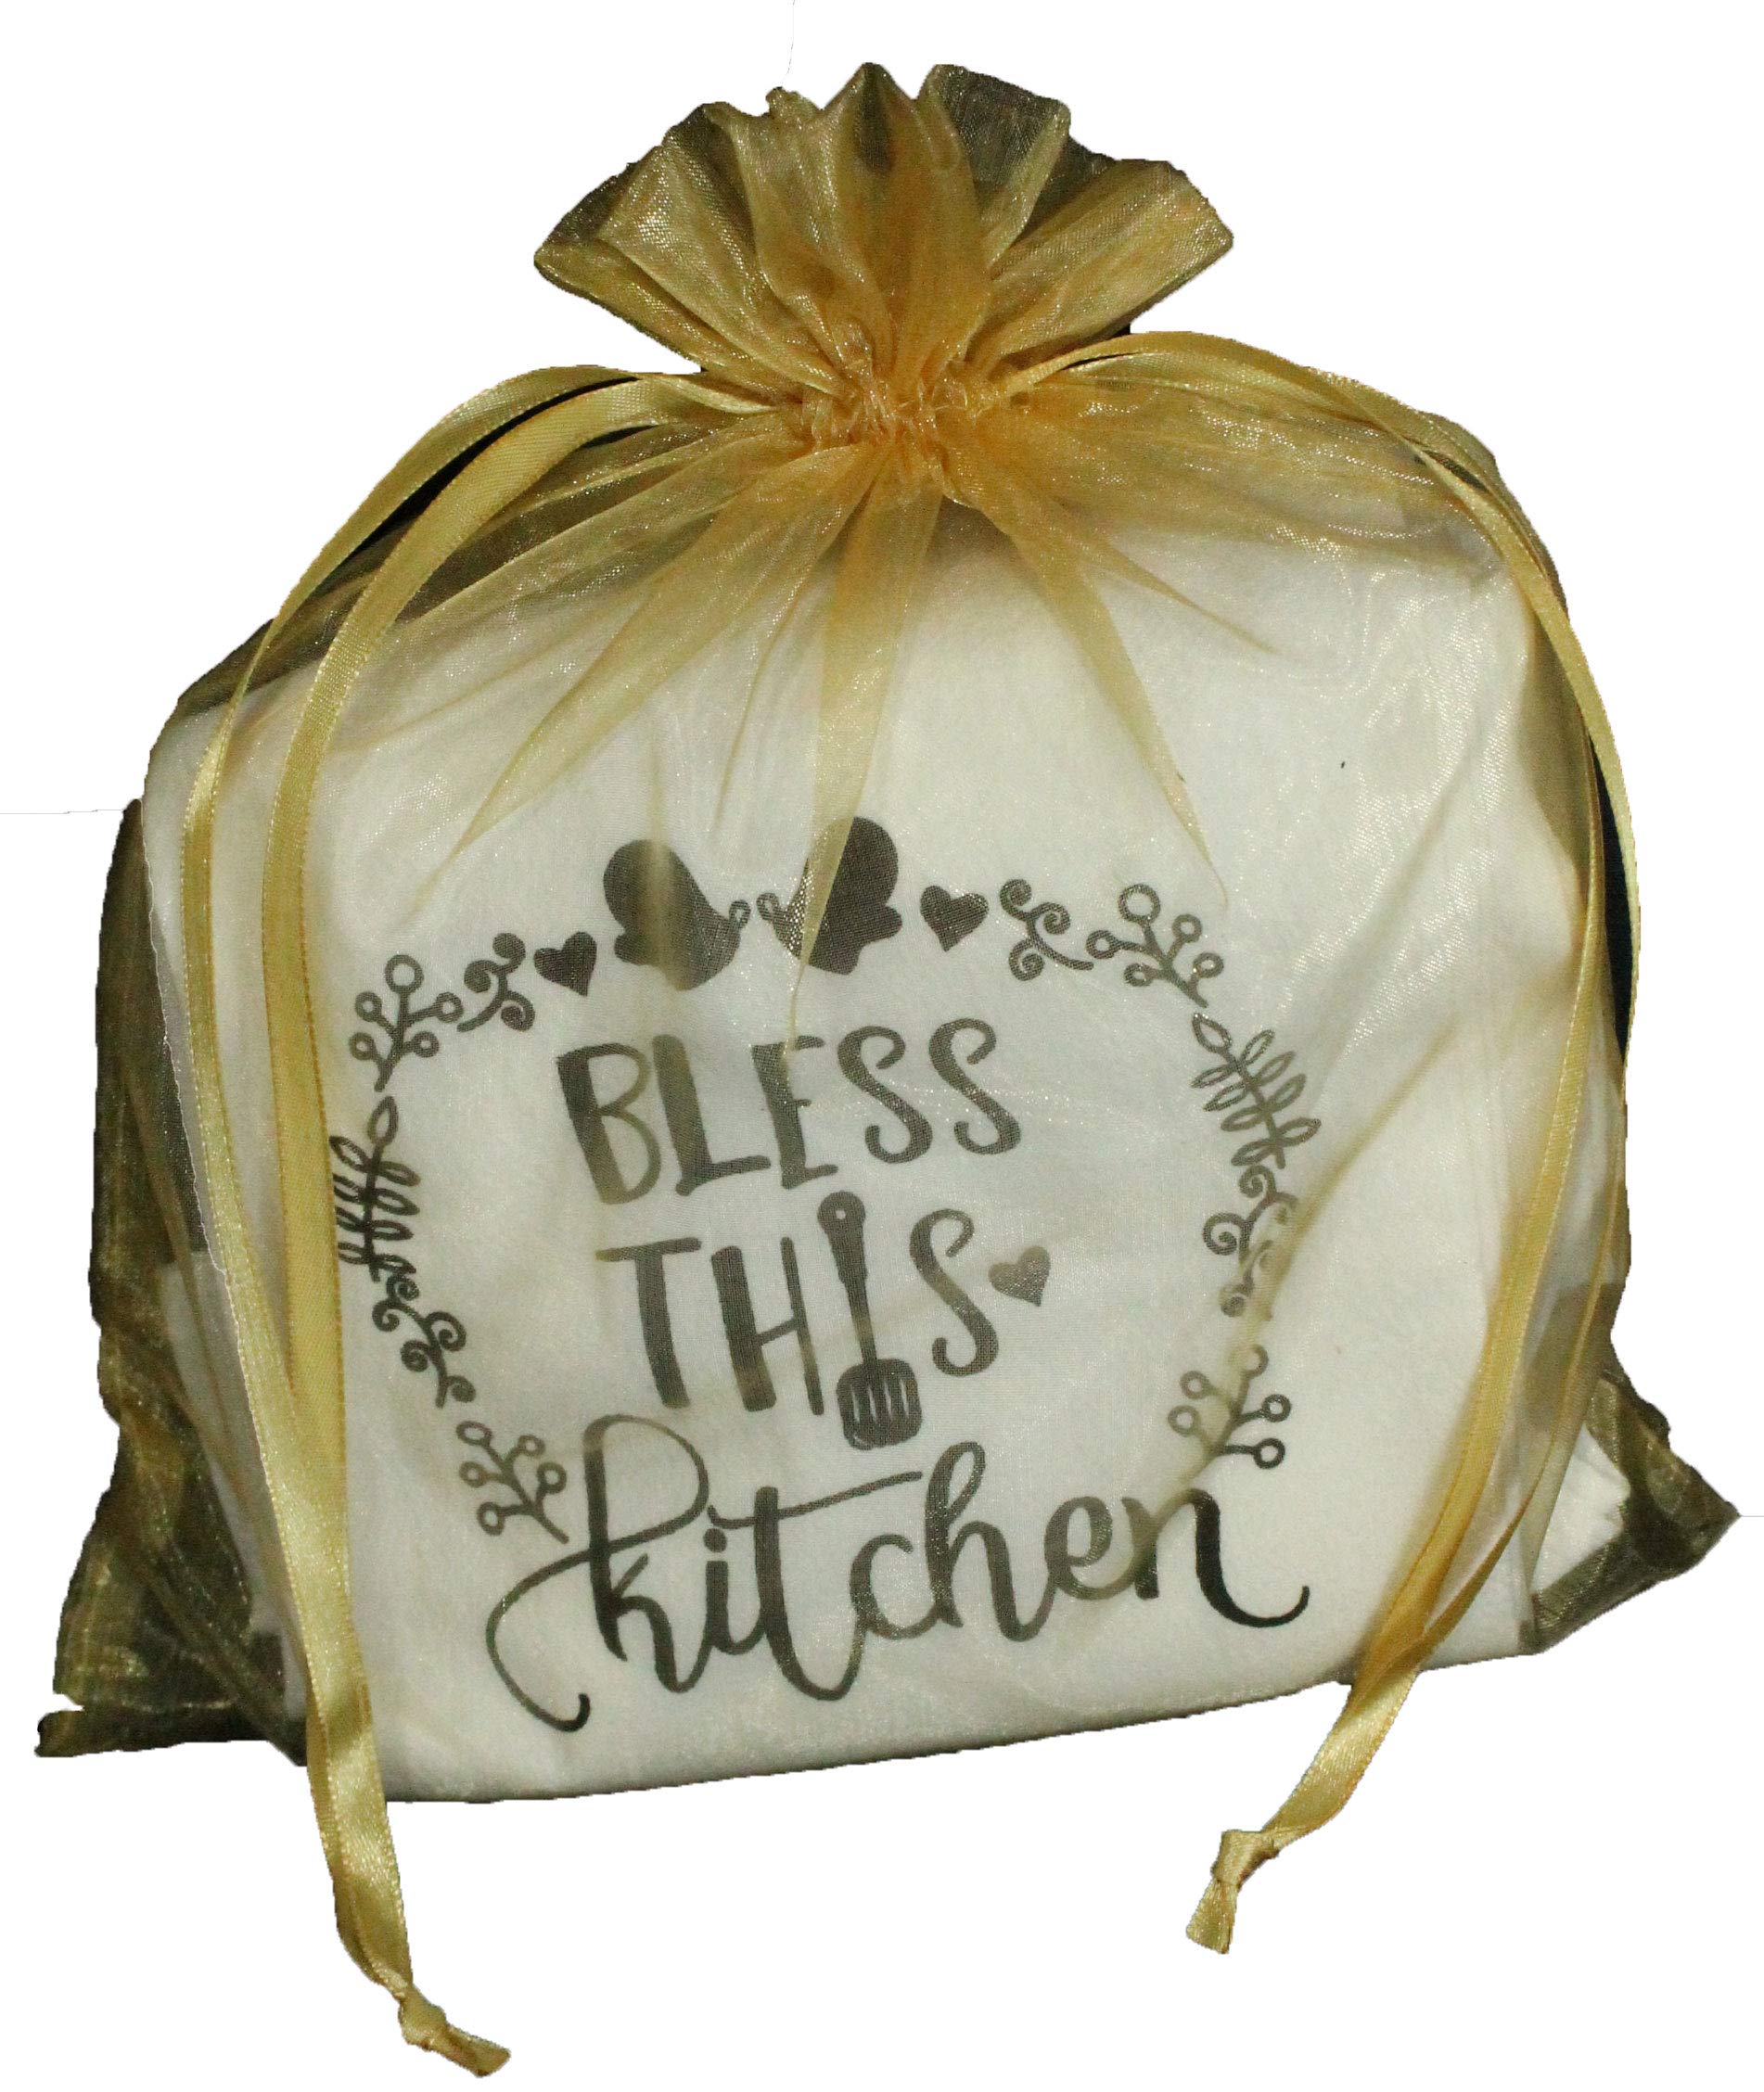 Everyday "Kind Sentiment" Kitchen Dish Towels - Set of 5 - Great Teacher or Gift Set for Women - Comes in a pretty Organza Gift Bag